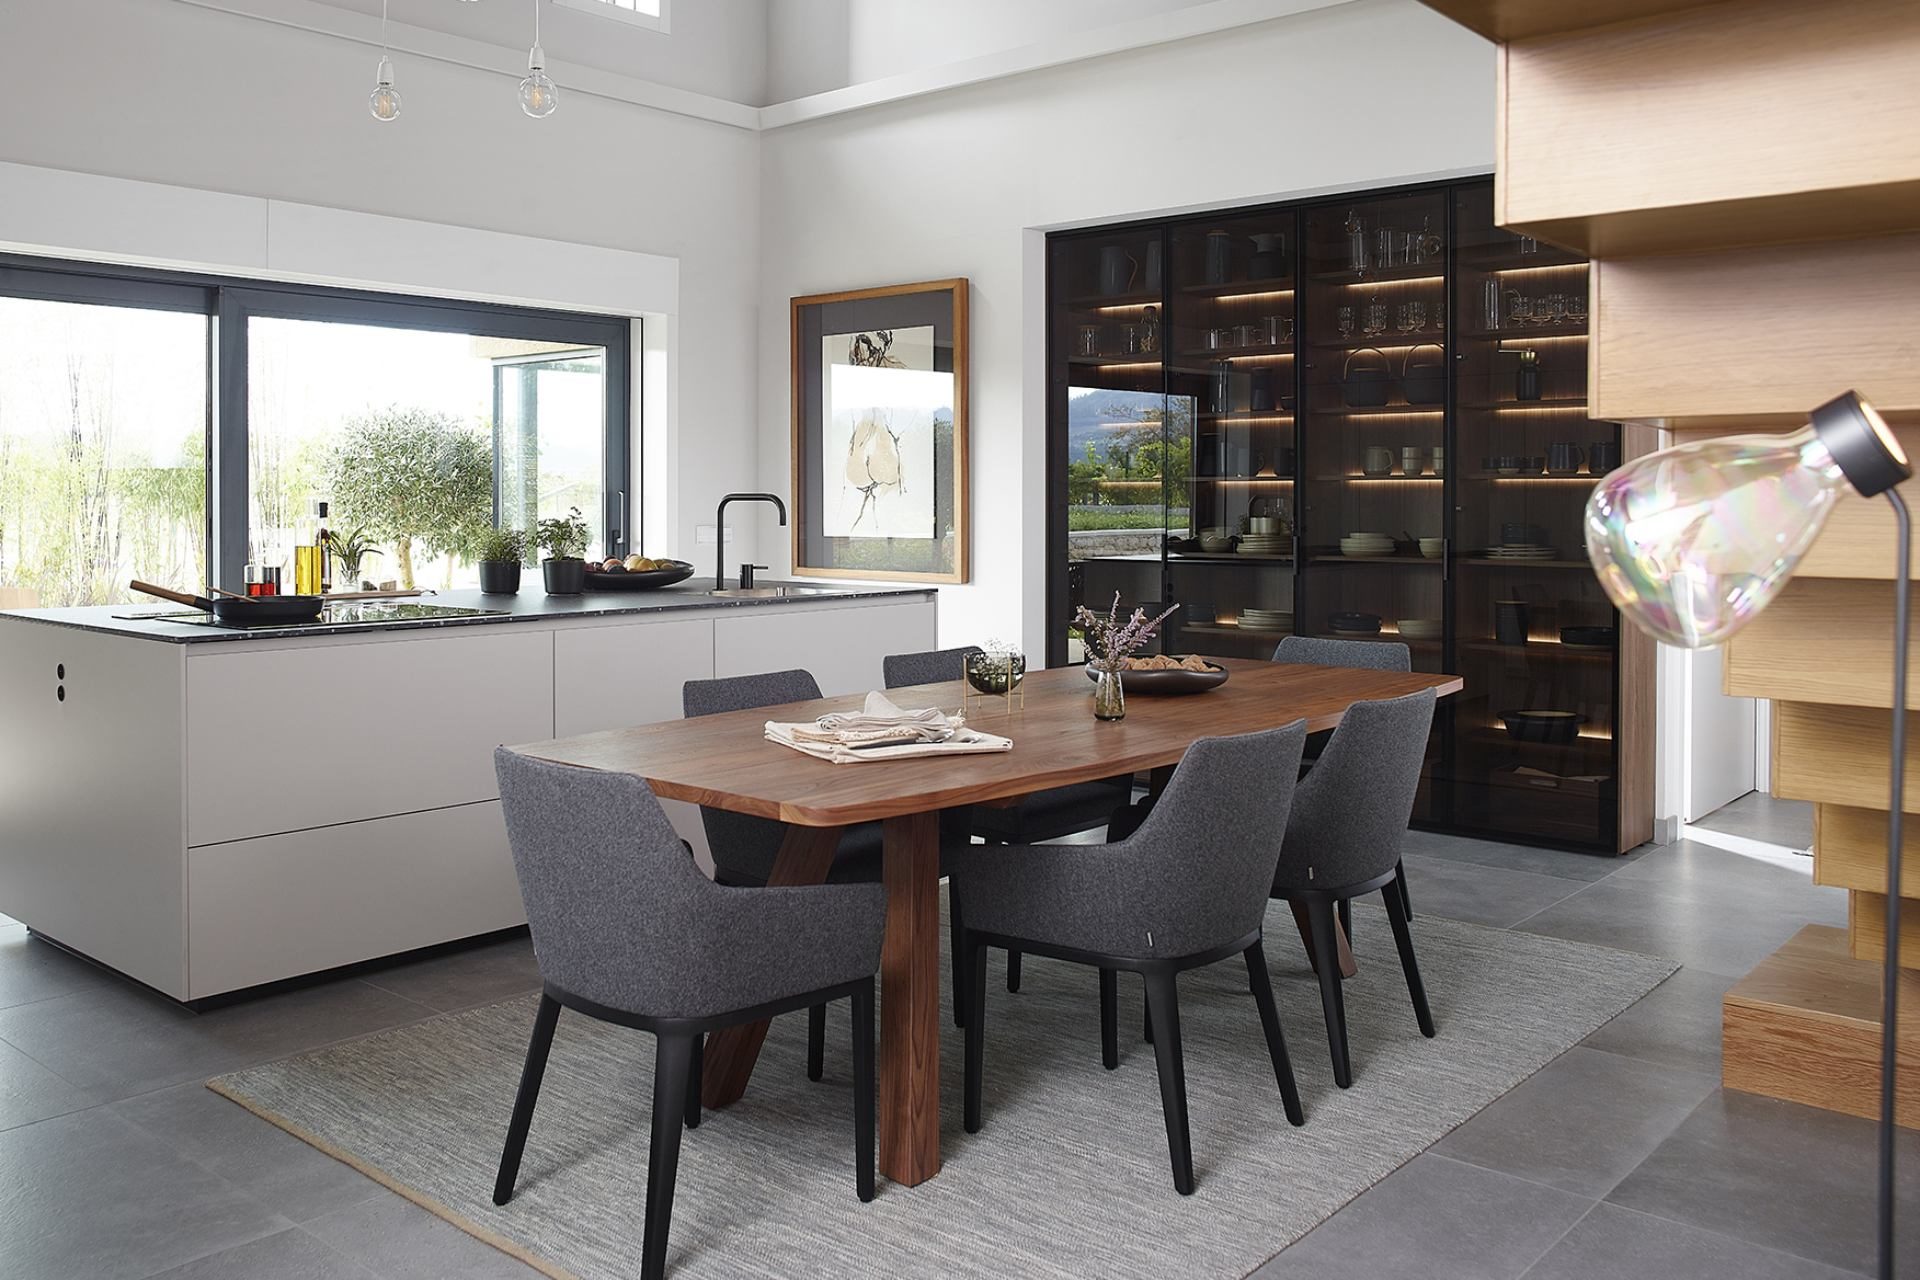 Photo of kitchen with central island, smoked glass display cabinet and dining table